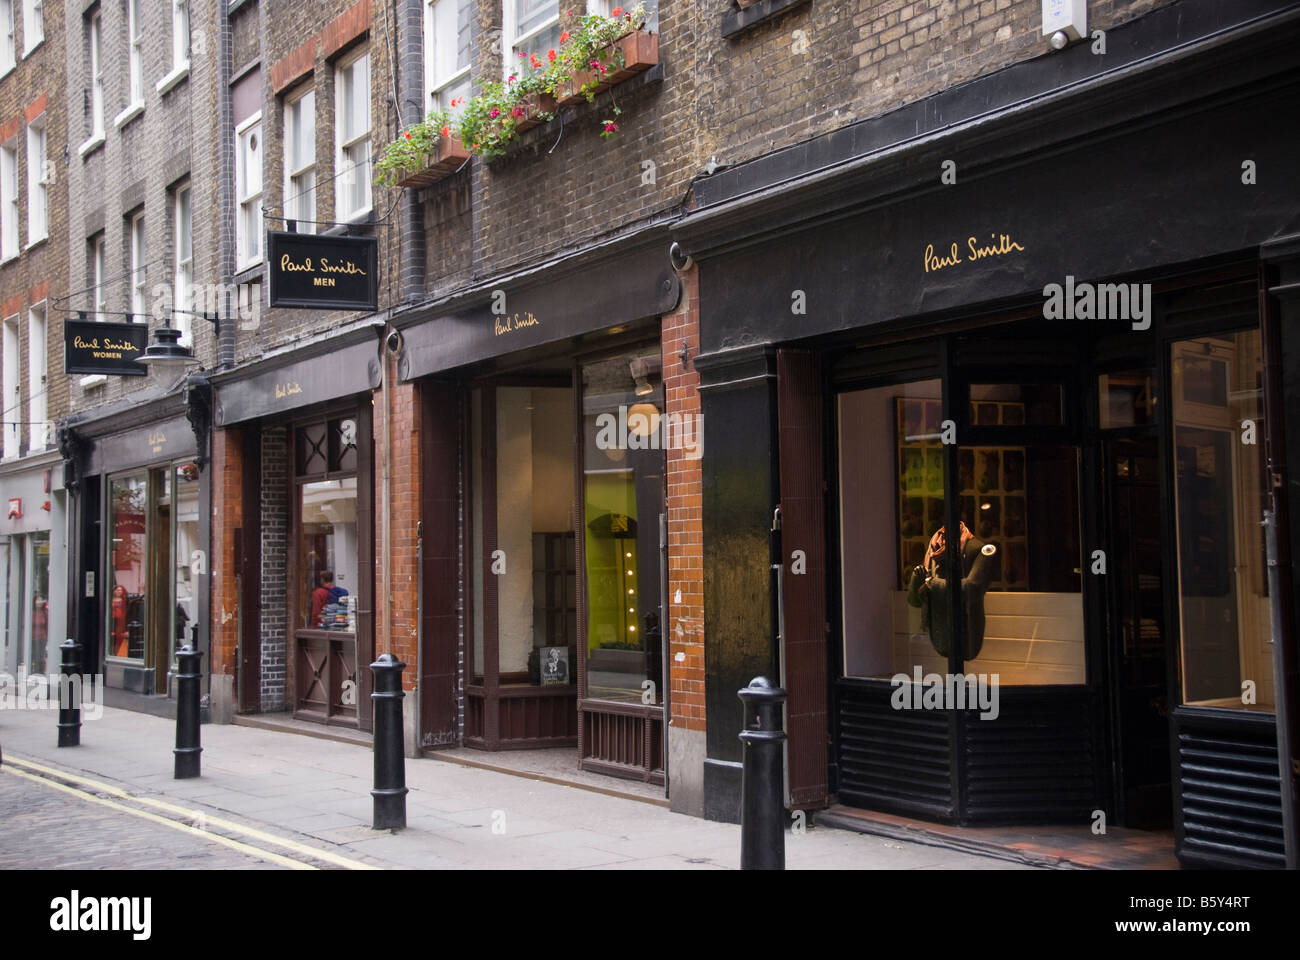 Paul Smith shops in Floral Street London Stock Photo - Alamy